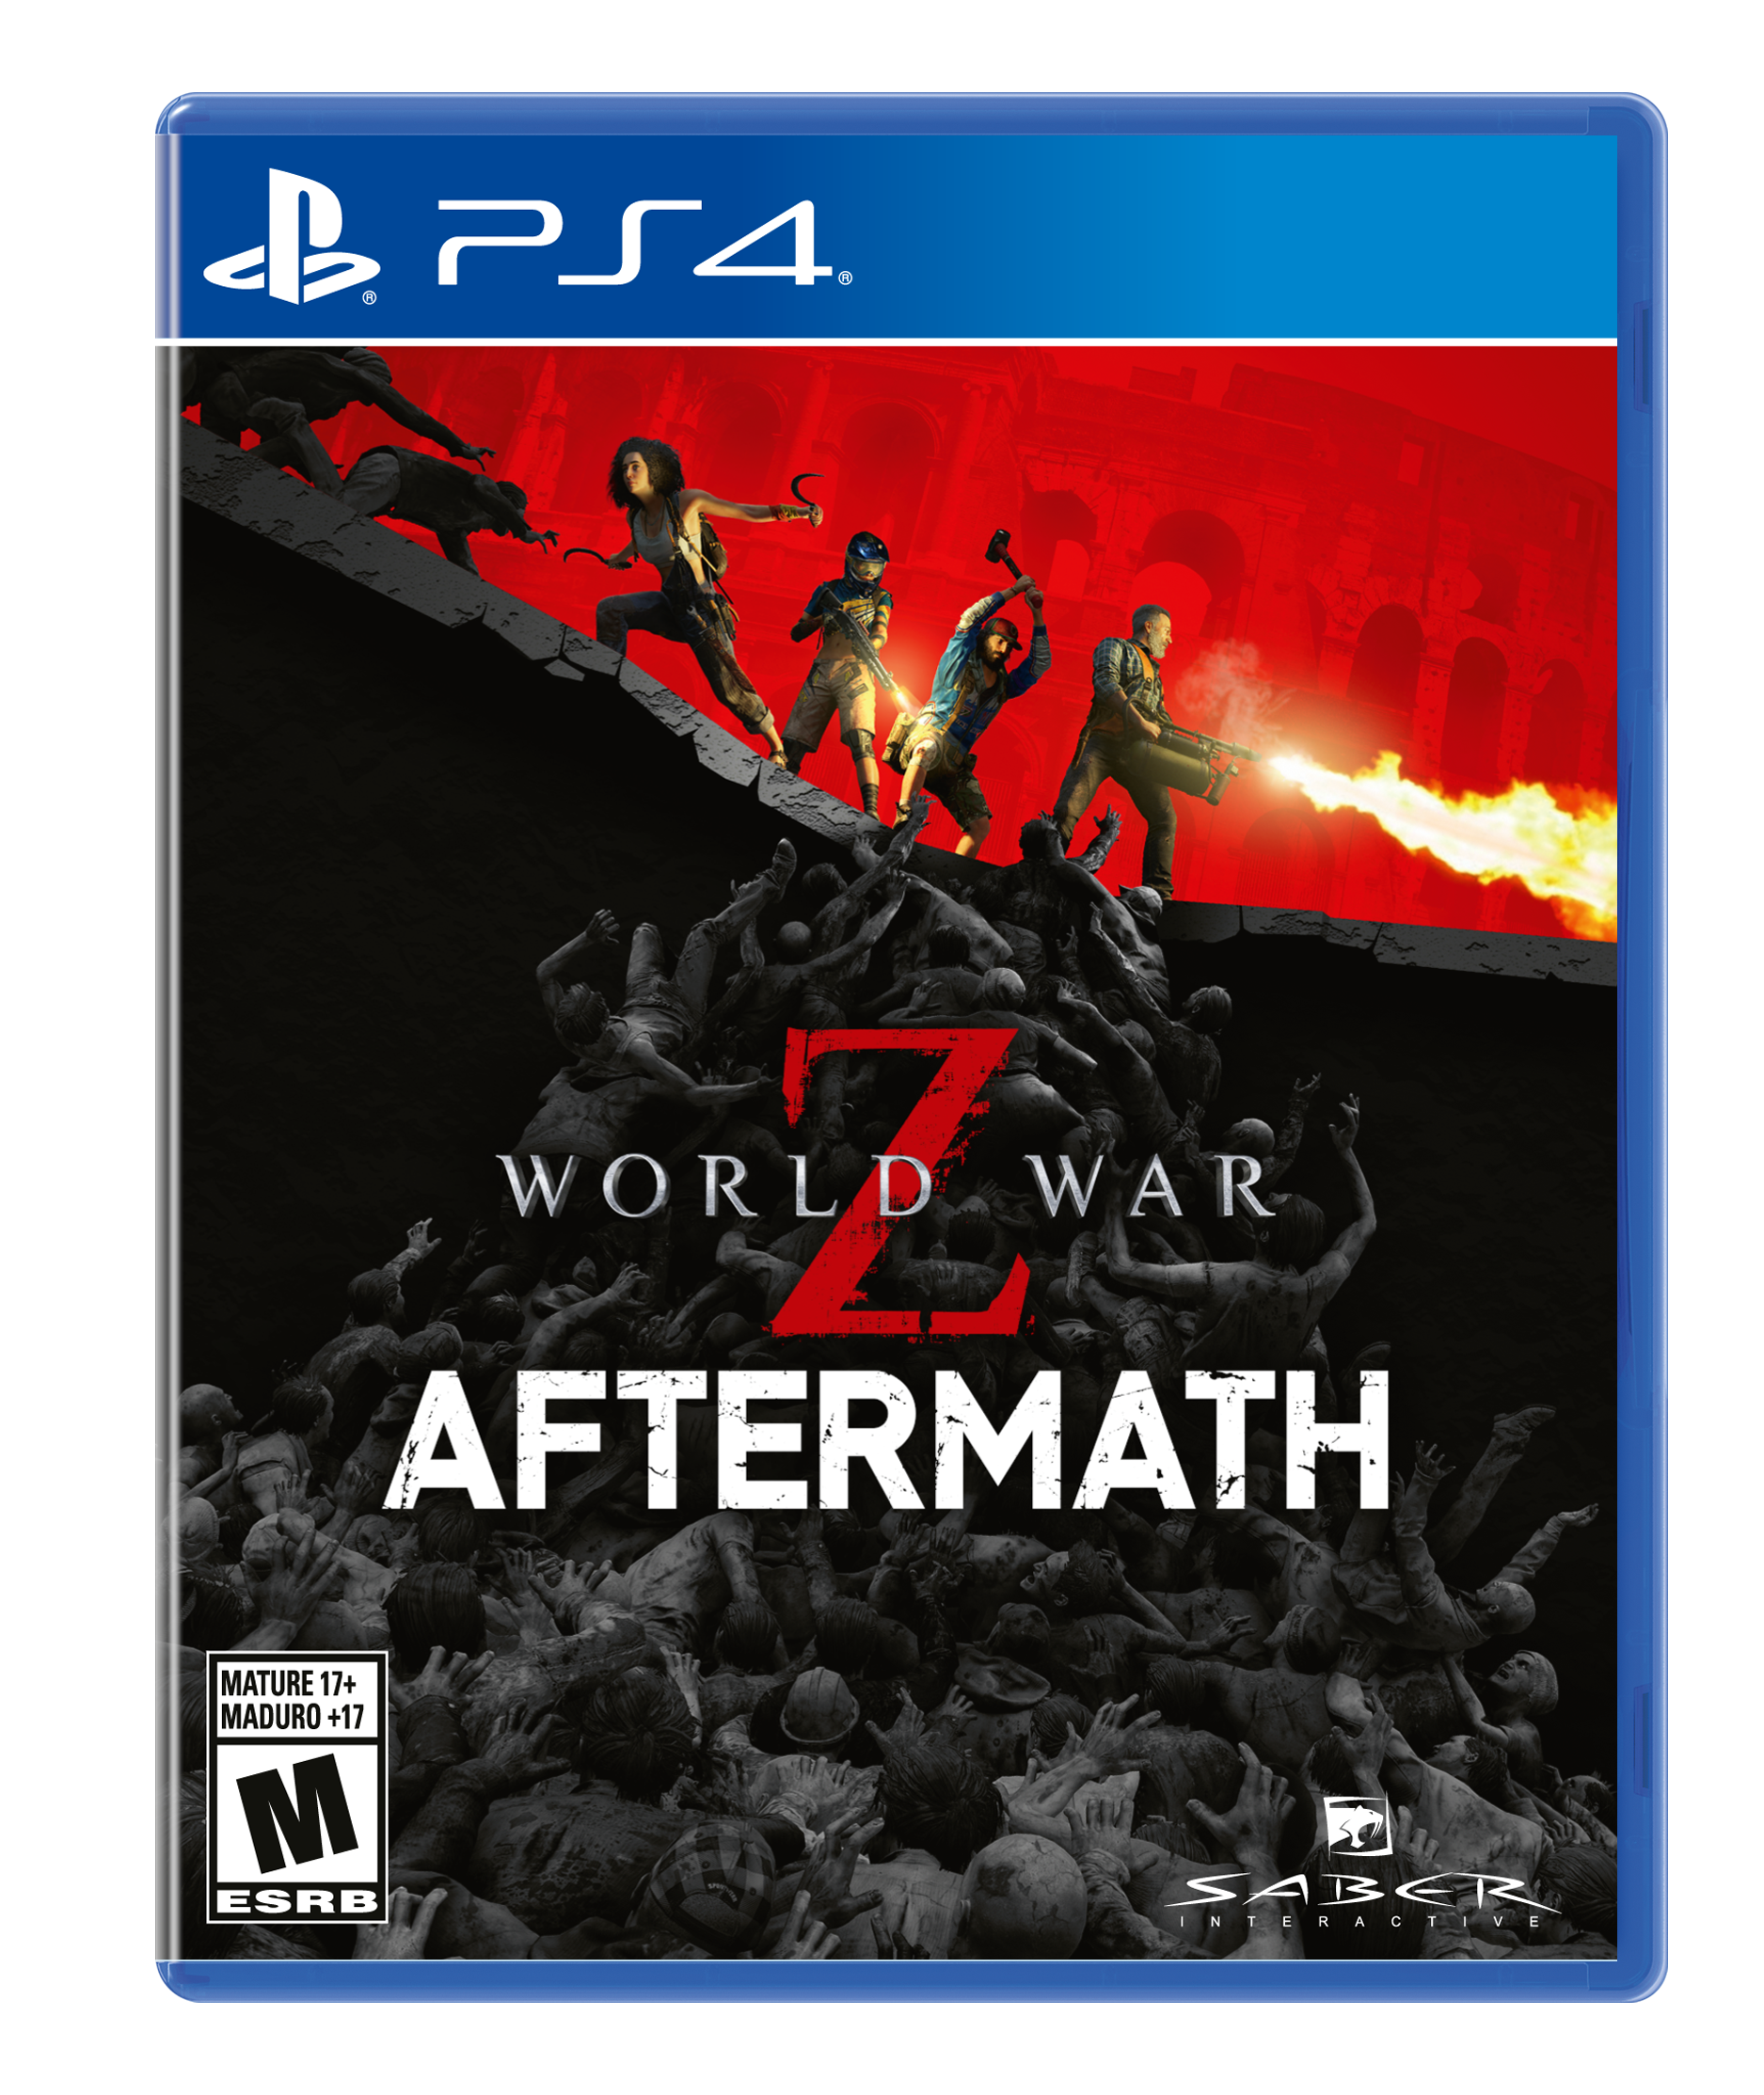 World War Z Playstation 4 PS4 Used